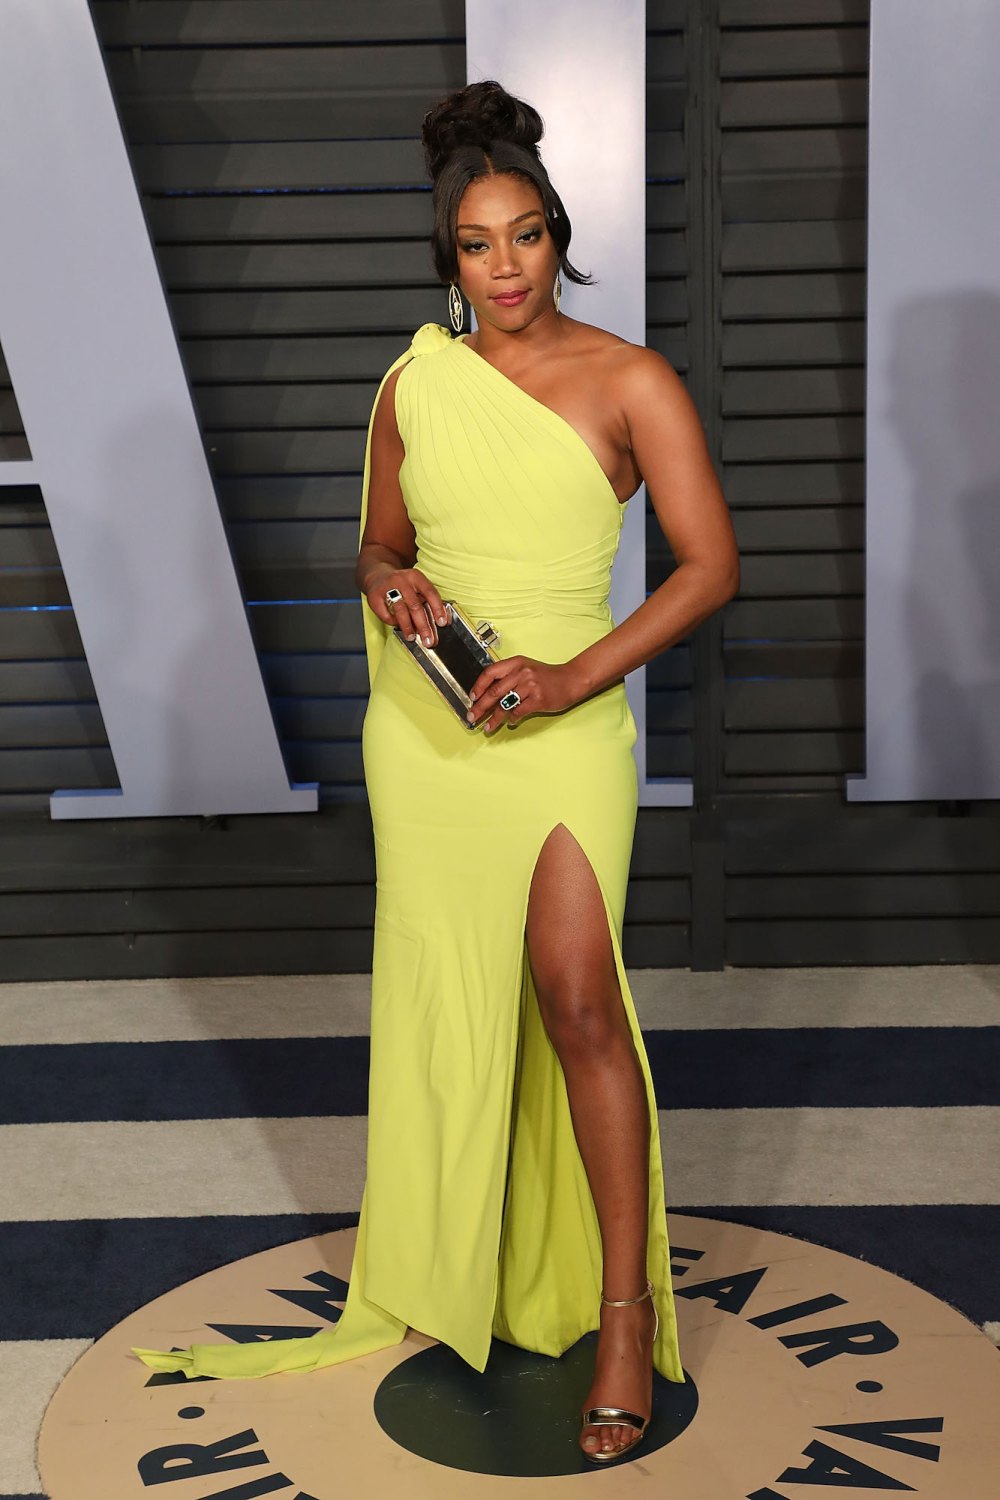 Tiffany Haddish Details Falling Out With Stylist Over 2018 Oscars Dress